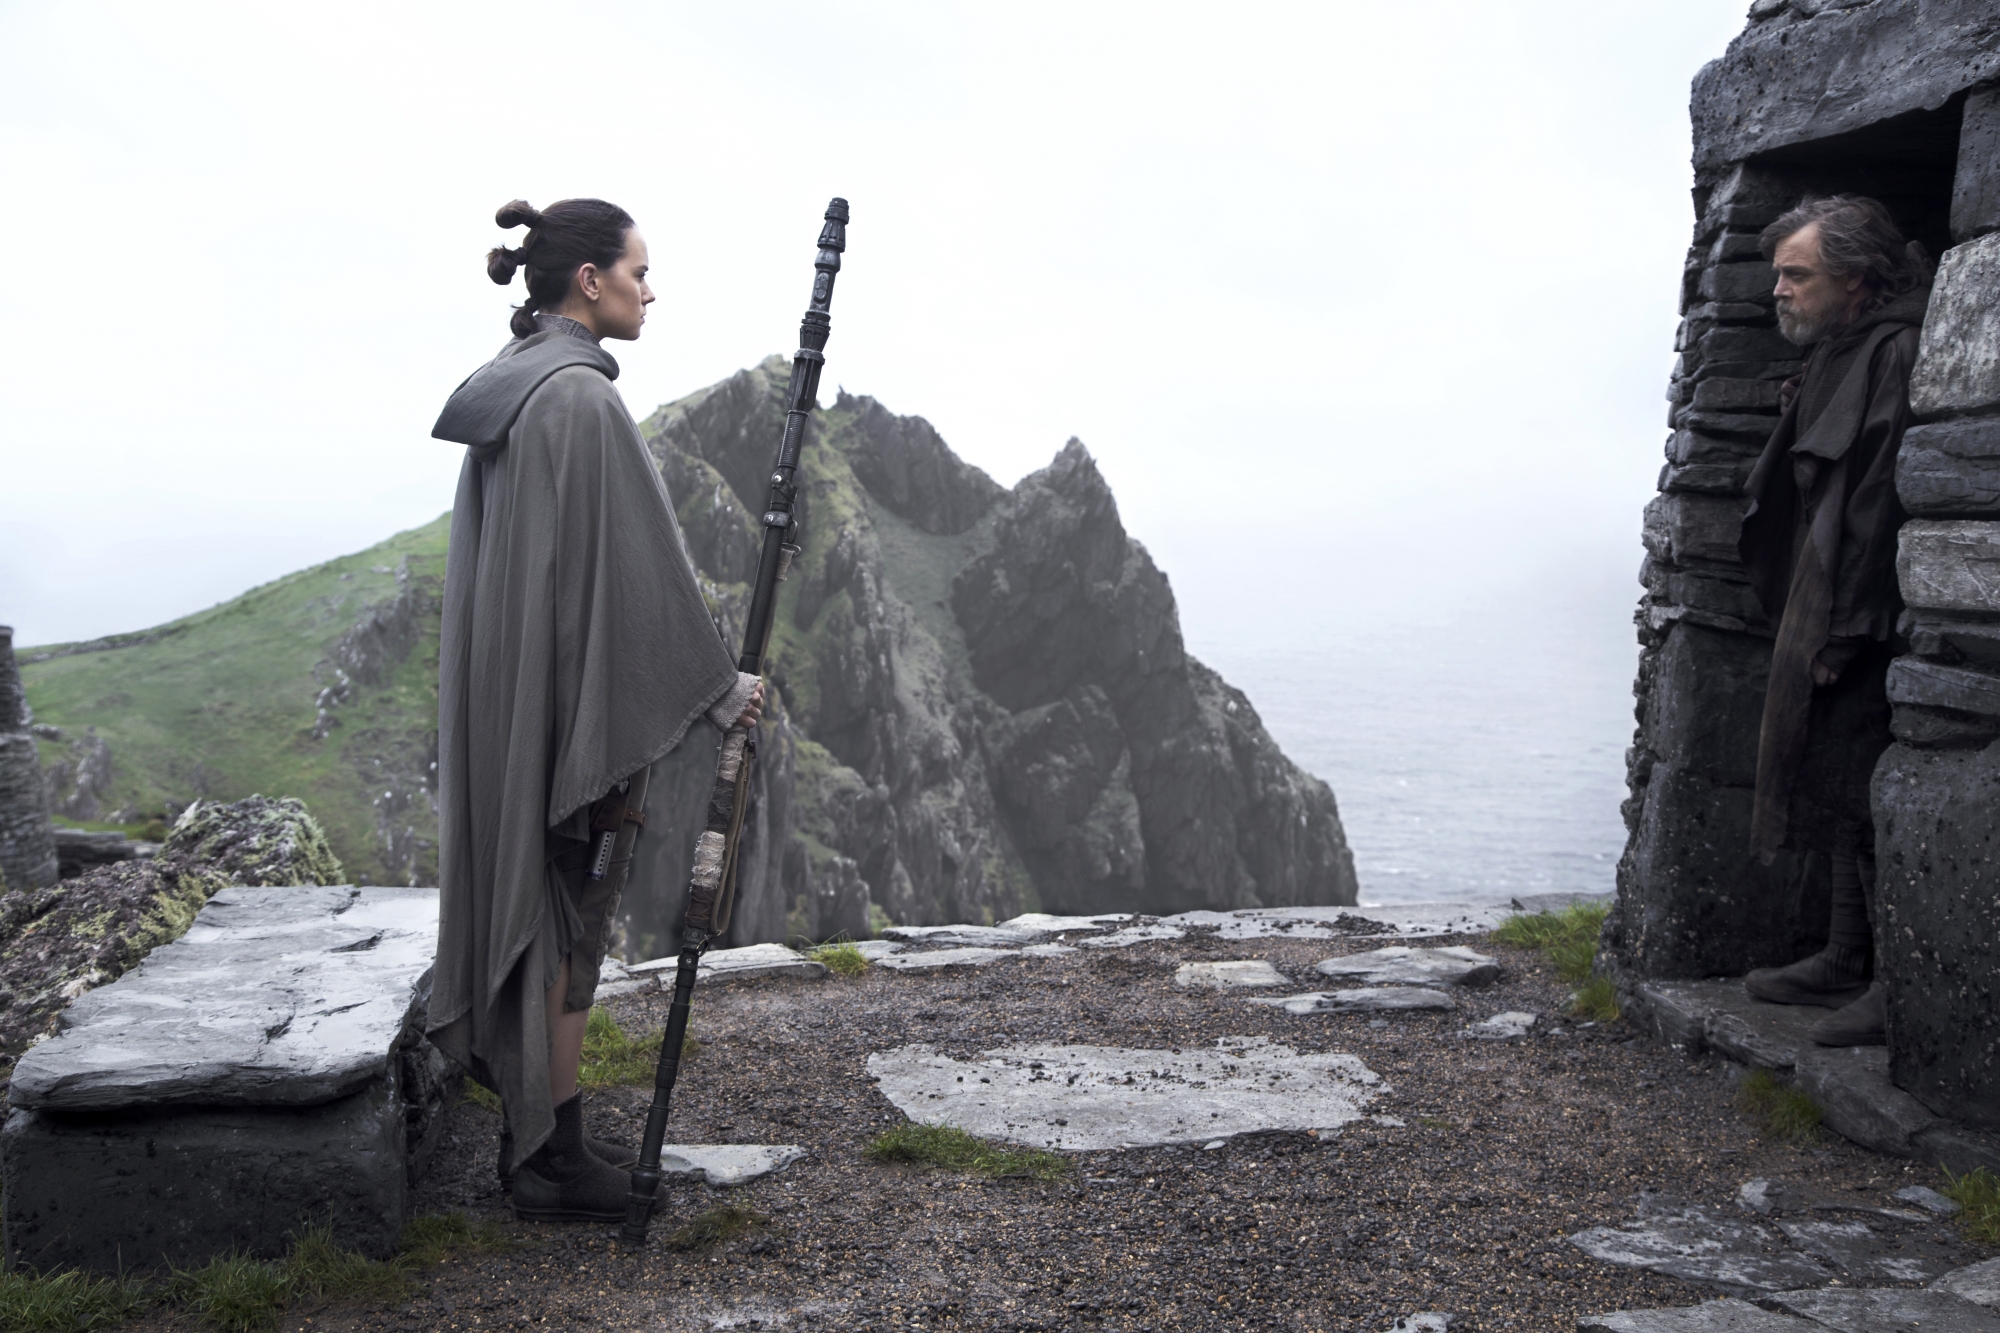 Star Wars: The Last Jedi..L to R: Rey (Daisy Ridley) and Luke Skywalker (Mark Hamill)..Photo: Jonathan Olley..©2017 Lucasfilm Ltd. All Rights Reserved.